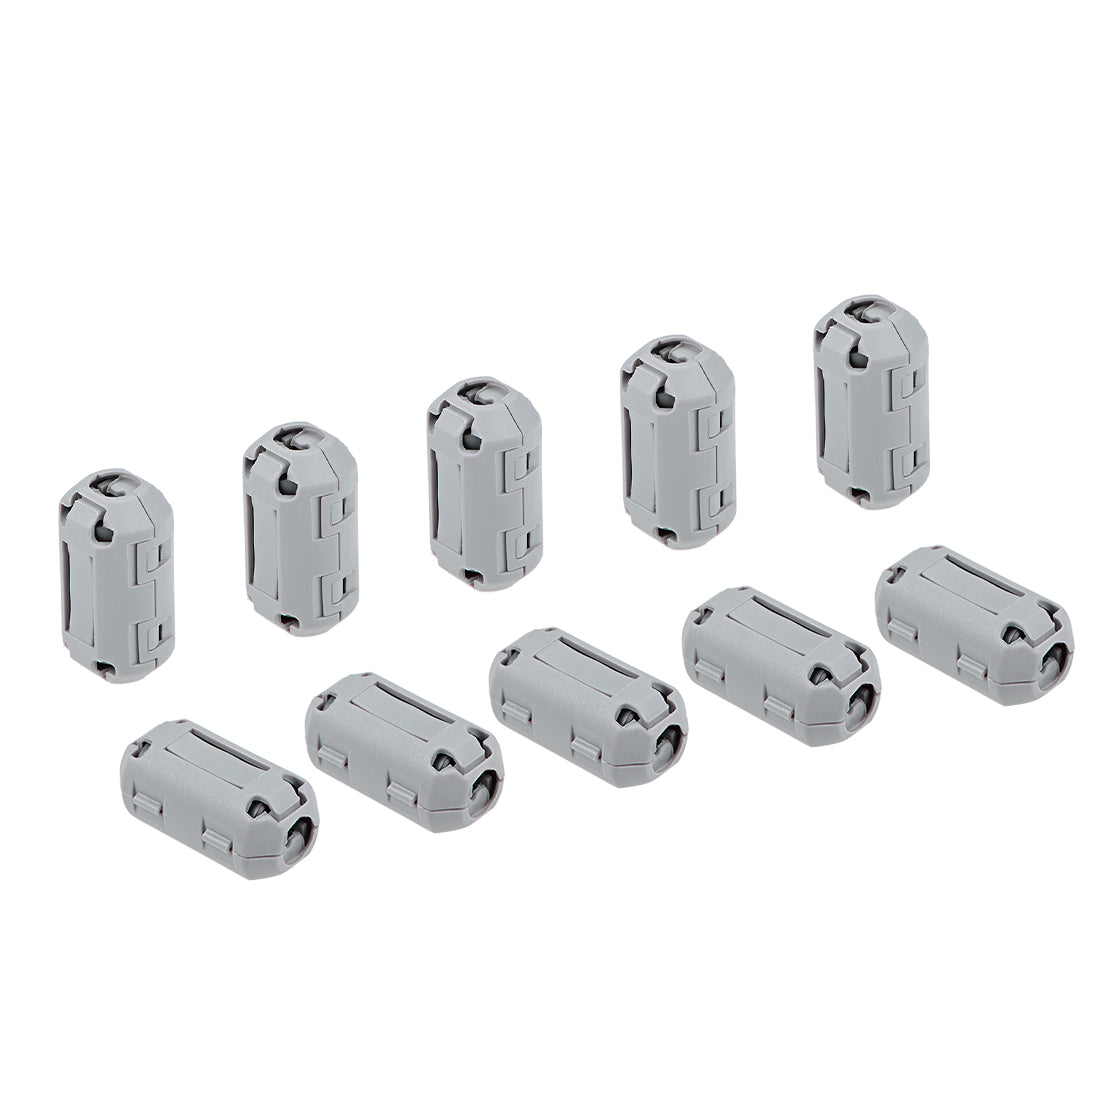 uxcell Uxcell 7mm Ferrite Cores Ring Clip-On RFI EMI Noise Suppression Cable Clip, Grey 10pcs